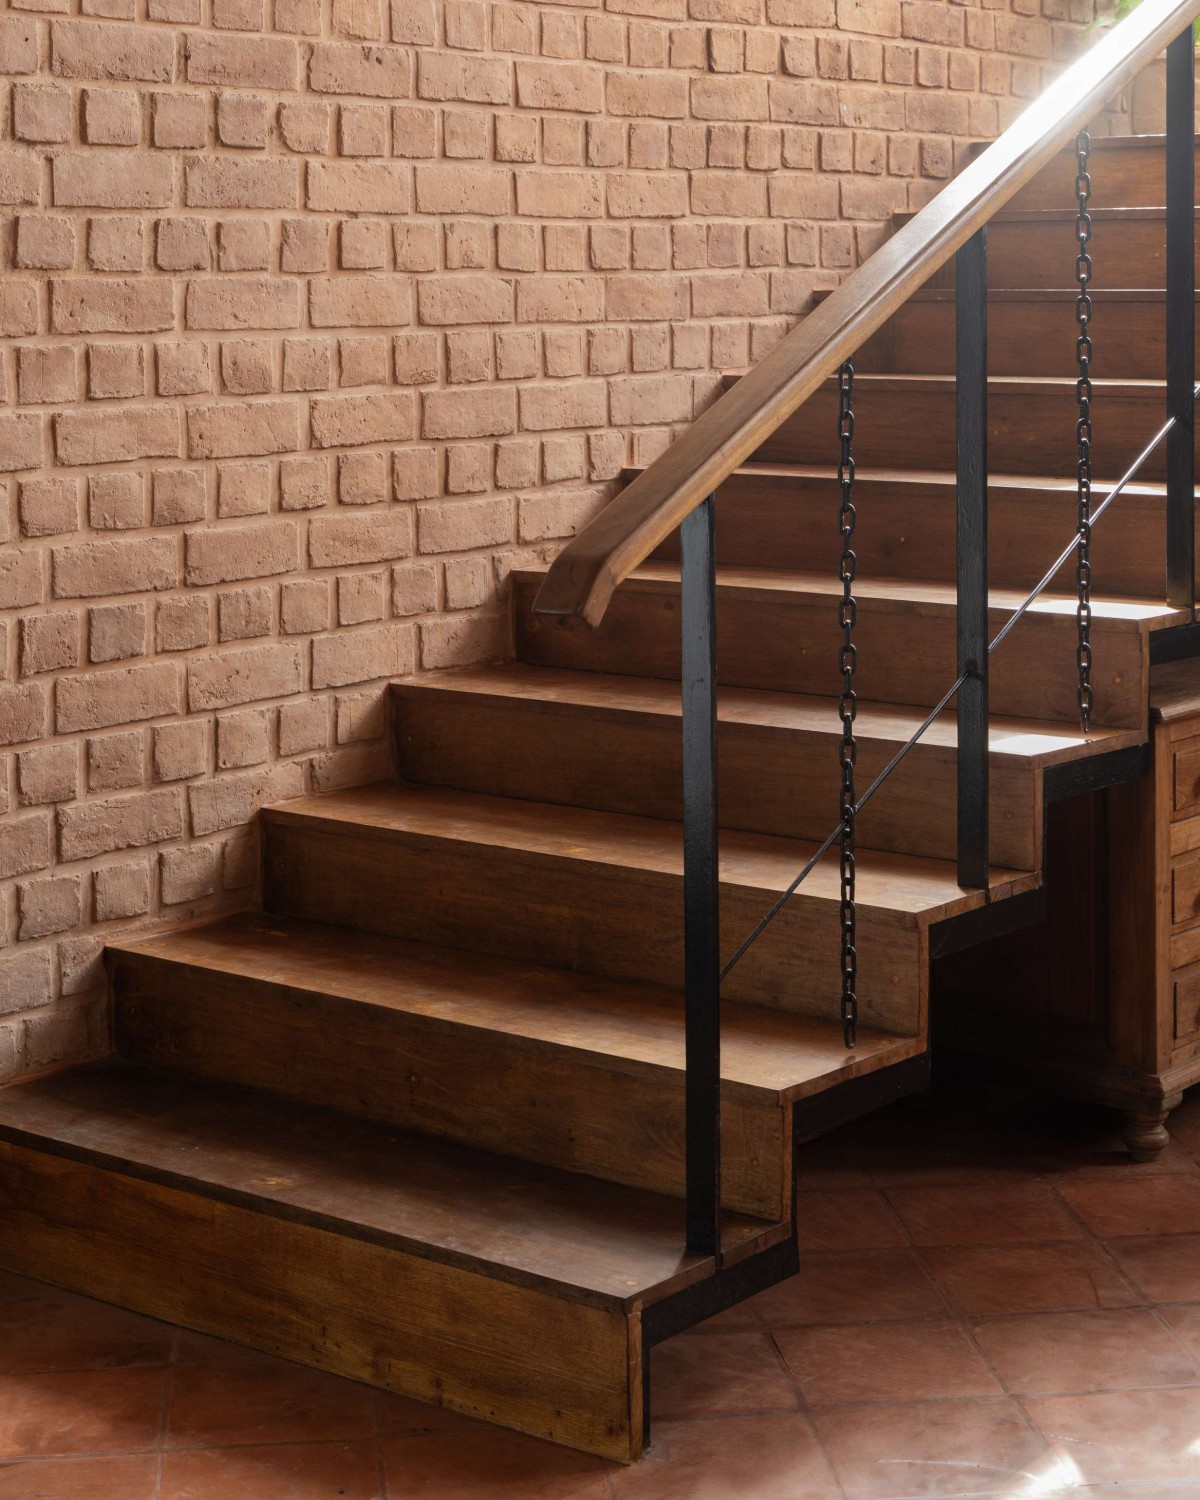 Staircase of Brick Manor by Bhutha Earthen Architecture Studio